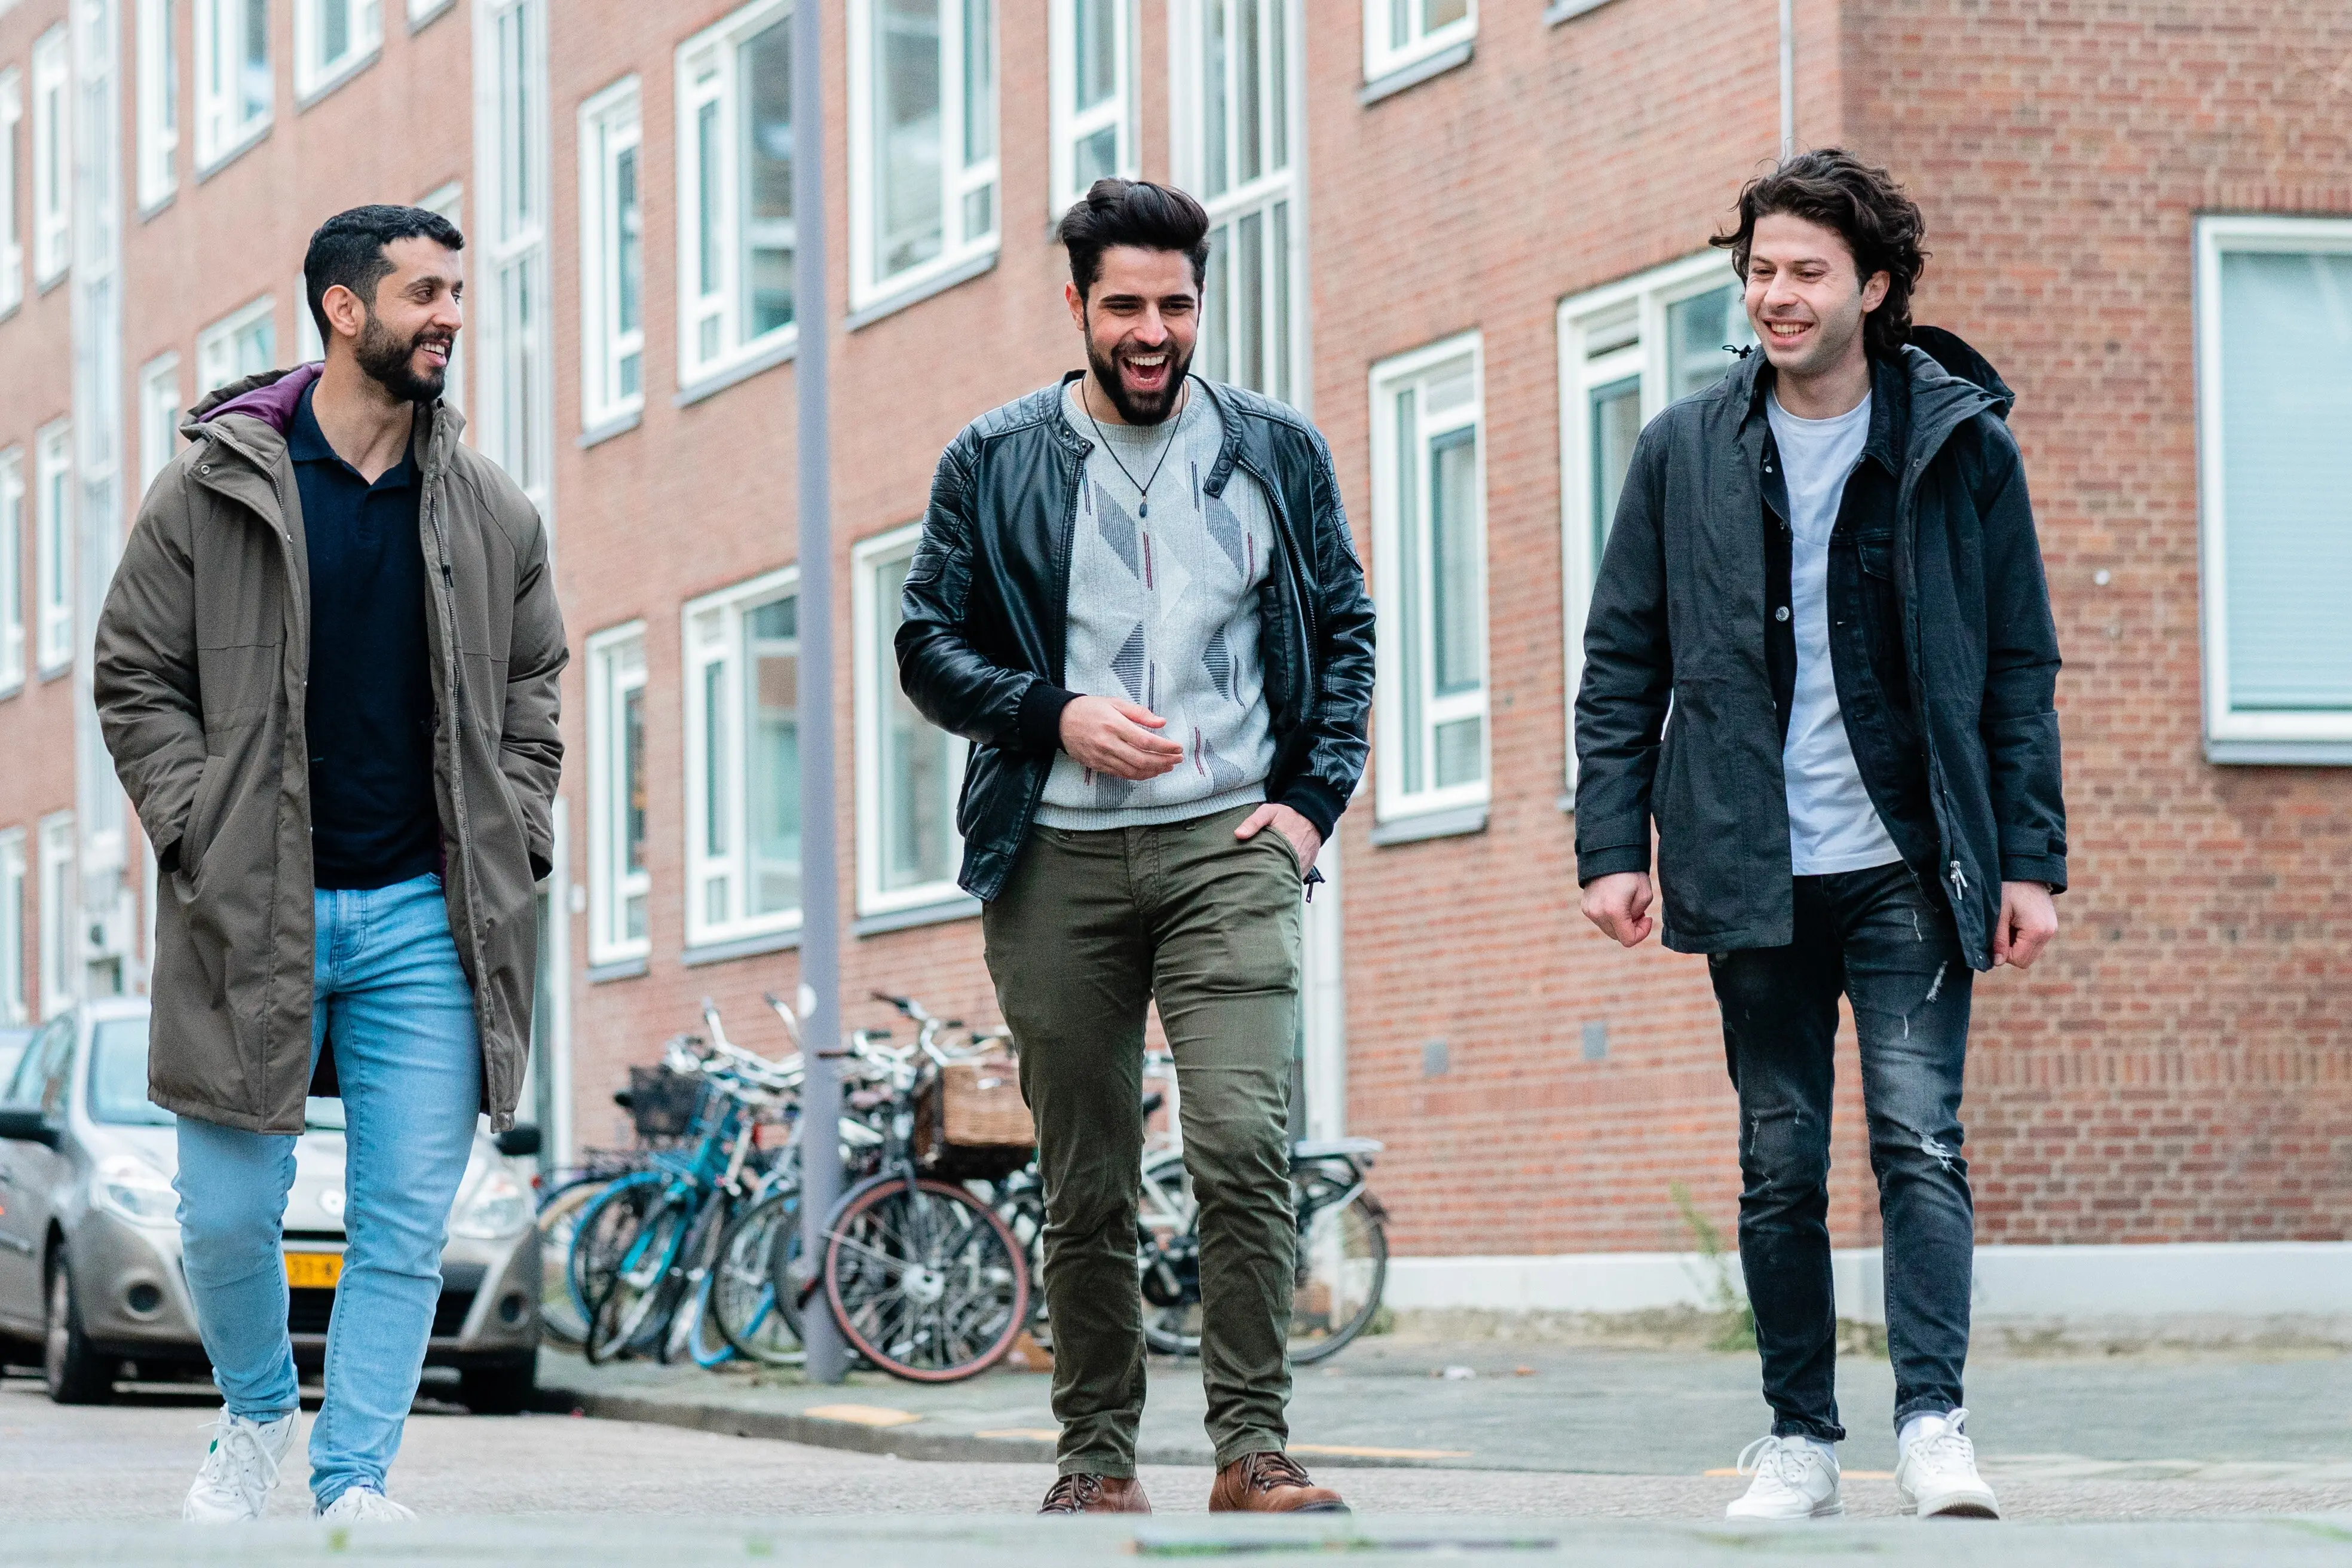 Two Syrian boys and one from Yemen walk the streets of Rotterdam talking and laughing